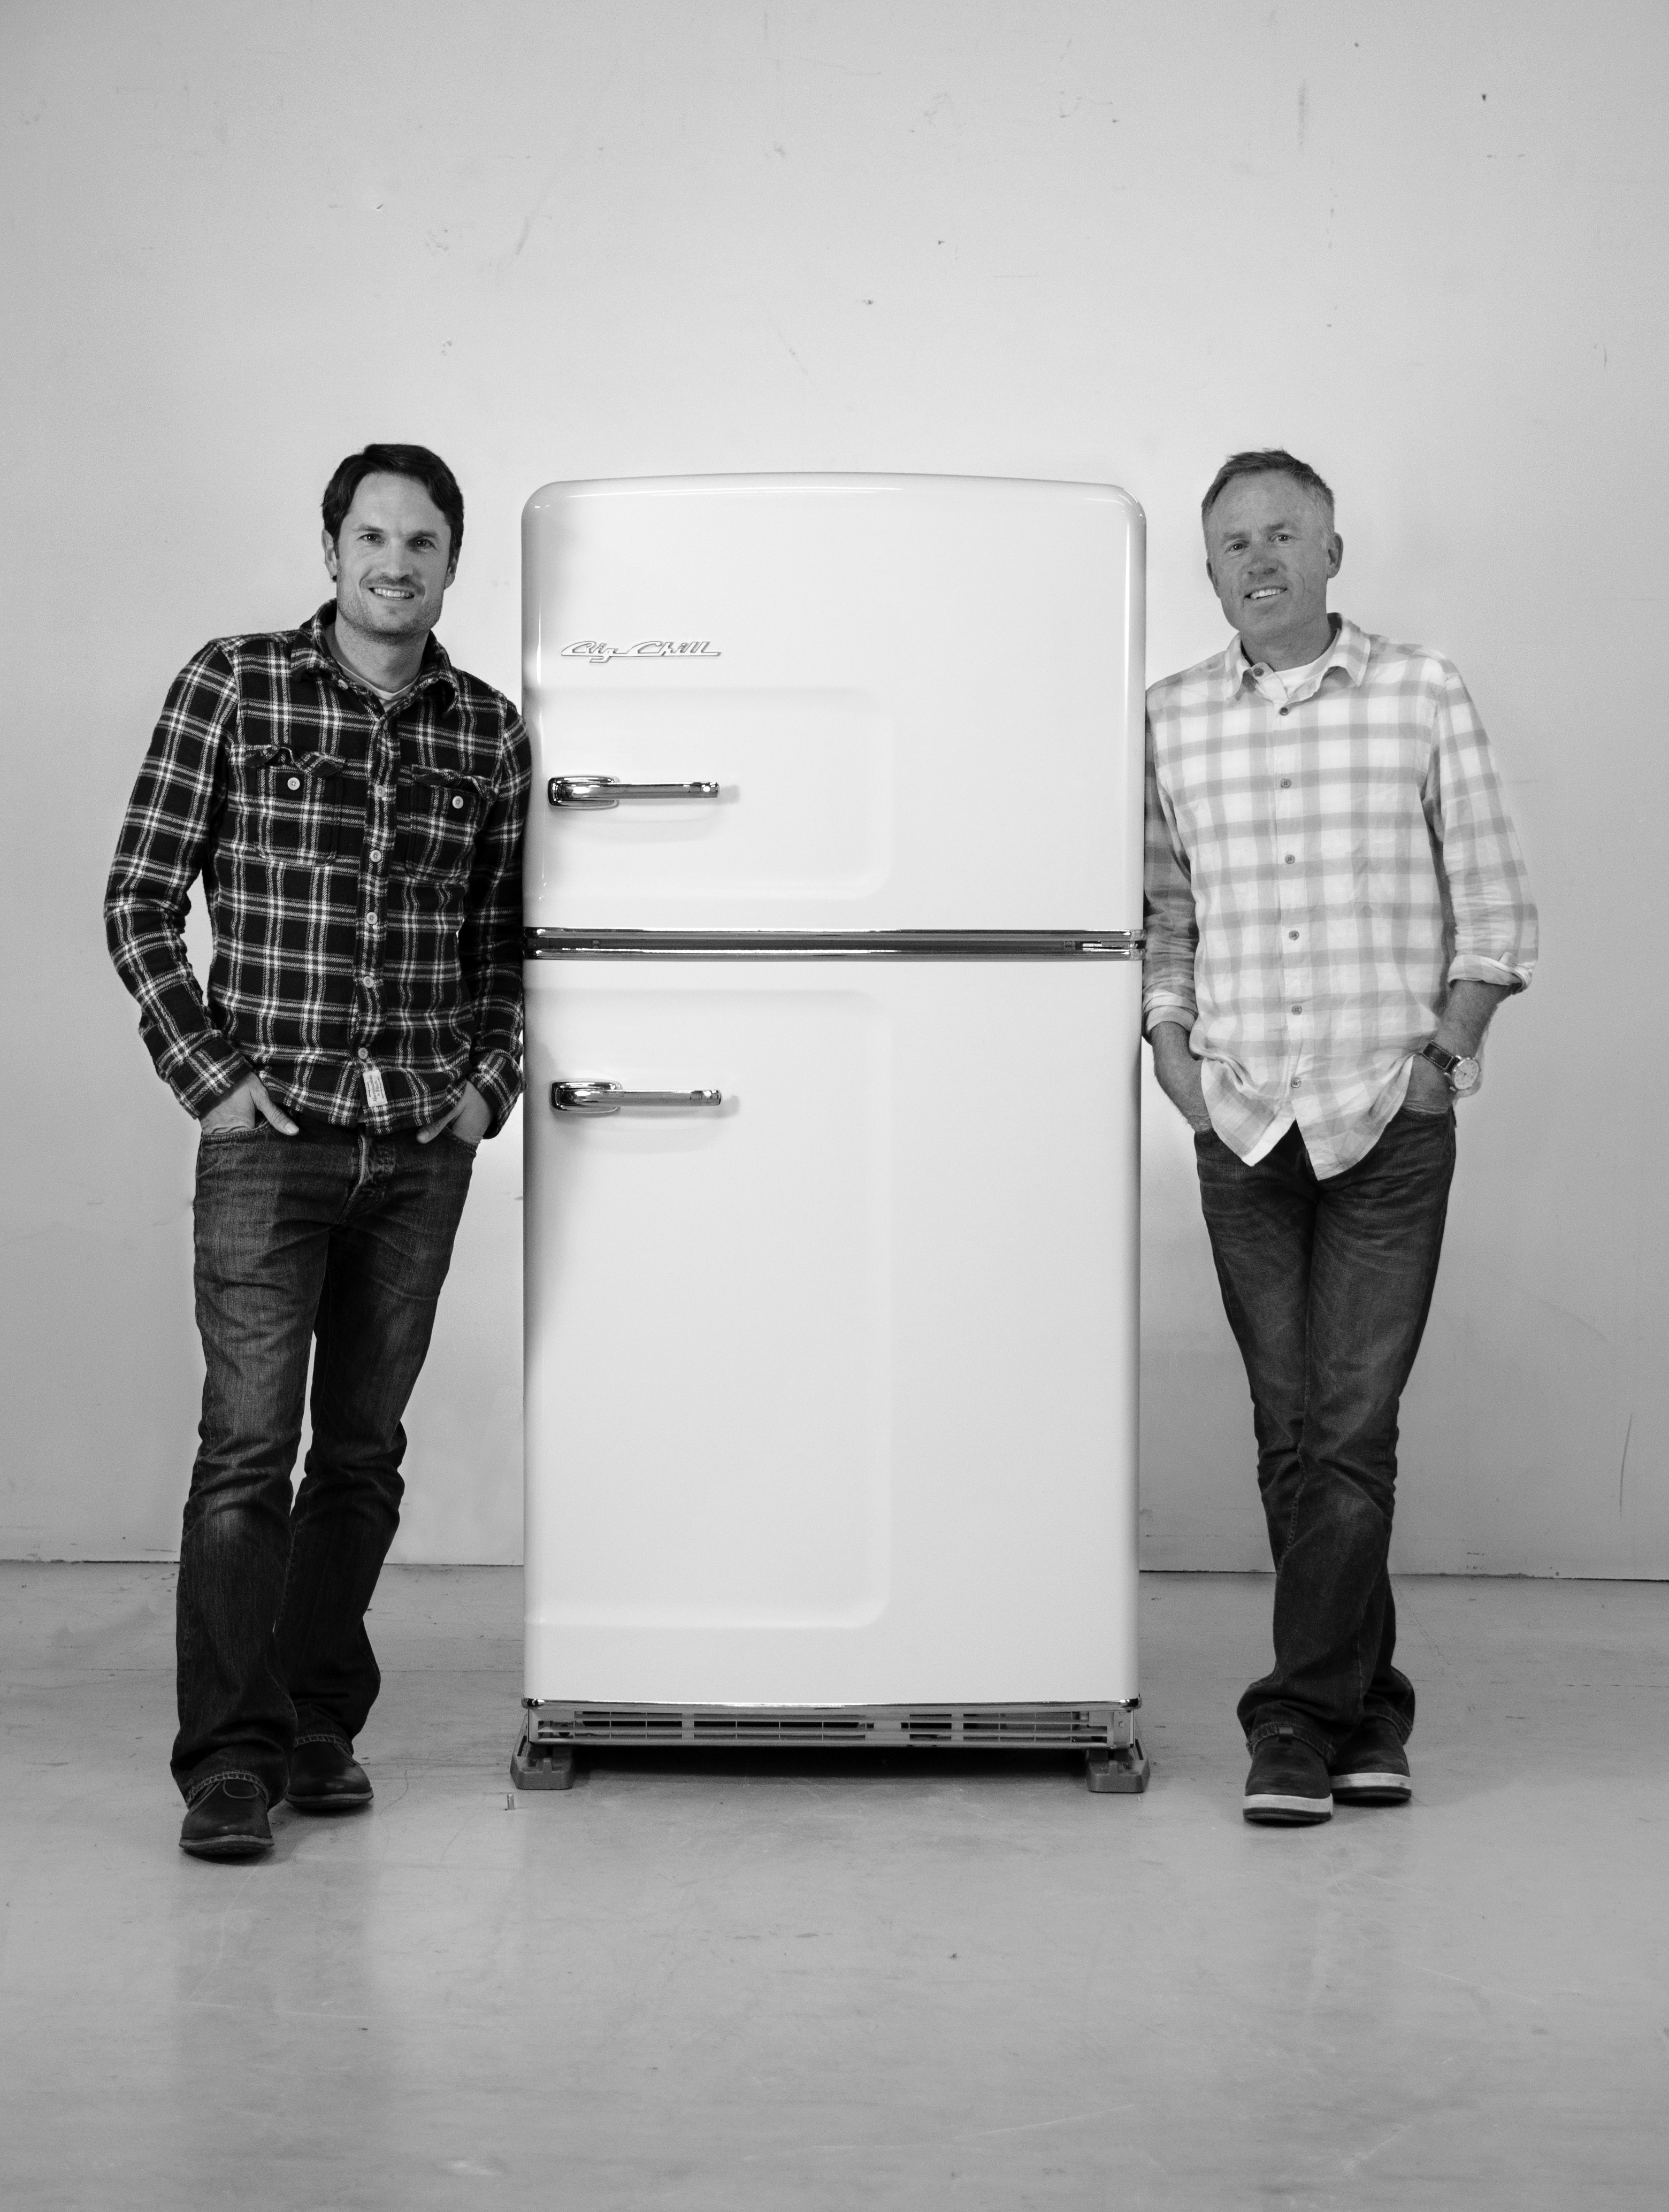 Orion Creamer and Thom Vernon with fridge